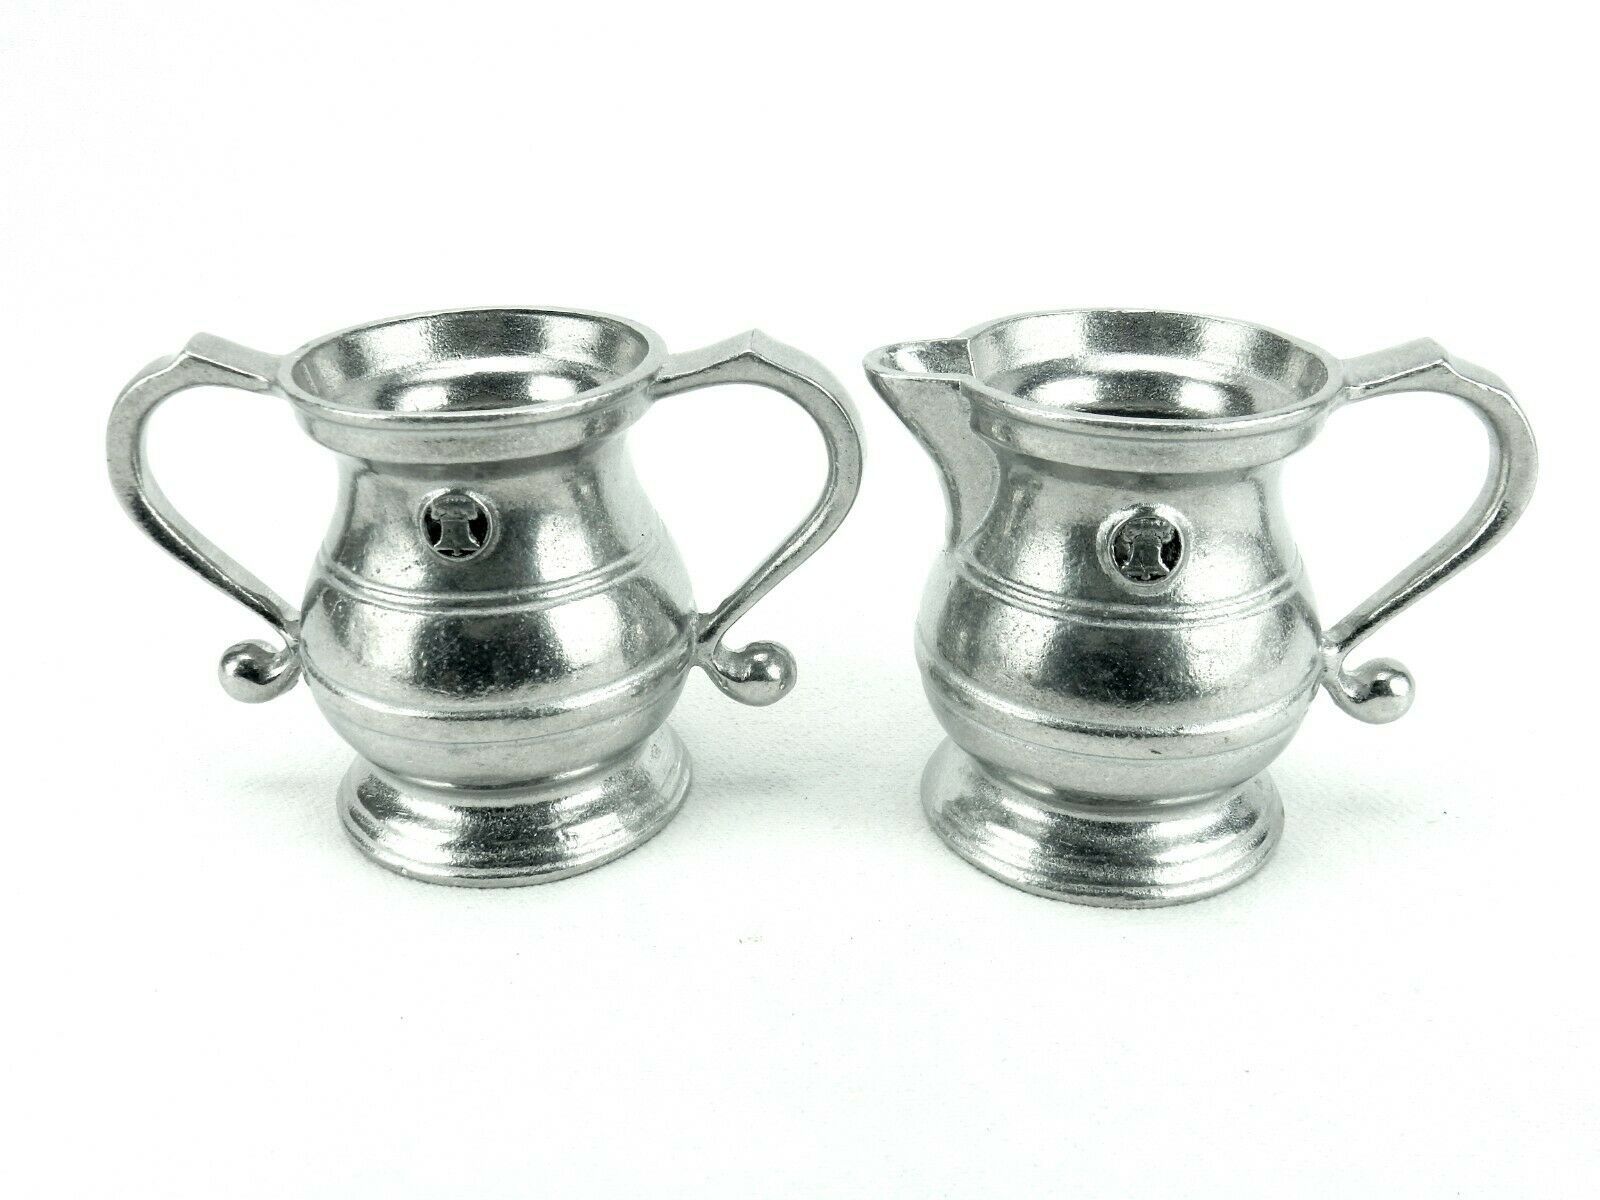 Armetale Creamer & Sugar Bowl, Wilton Liberty Bell, Highly Polished, #PWTCS8 - $19.55